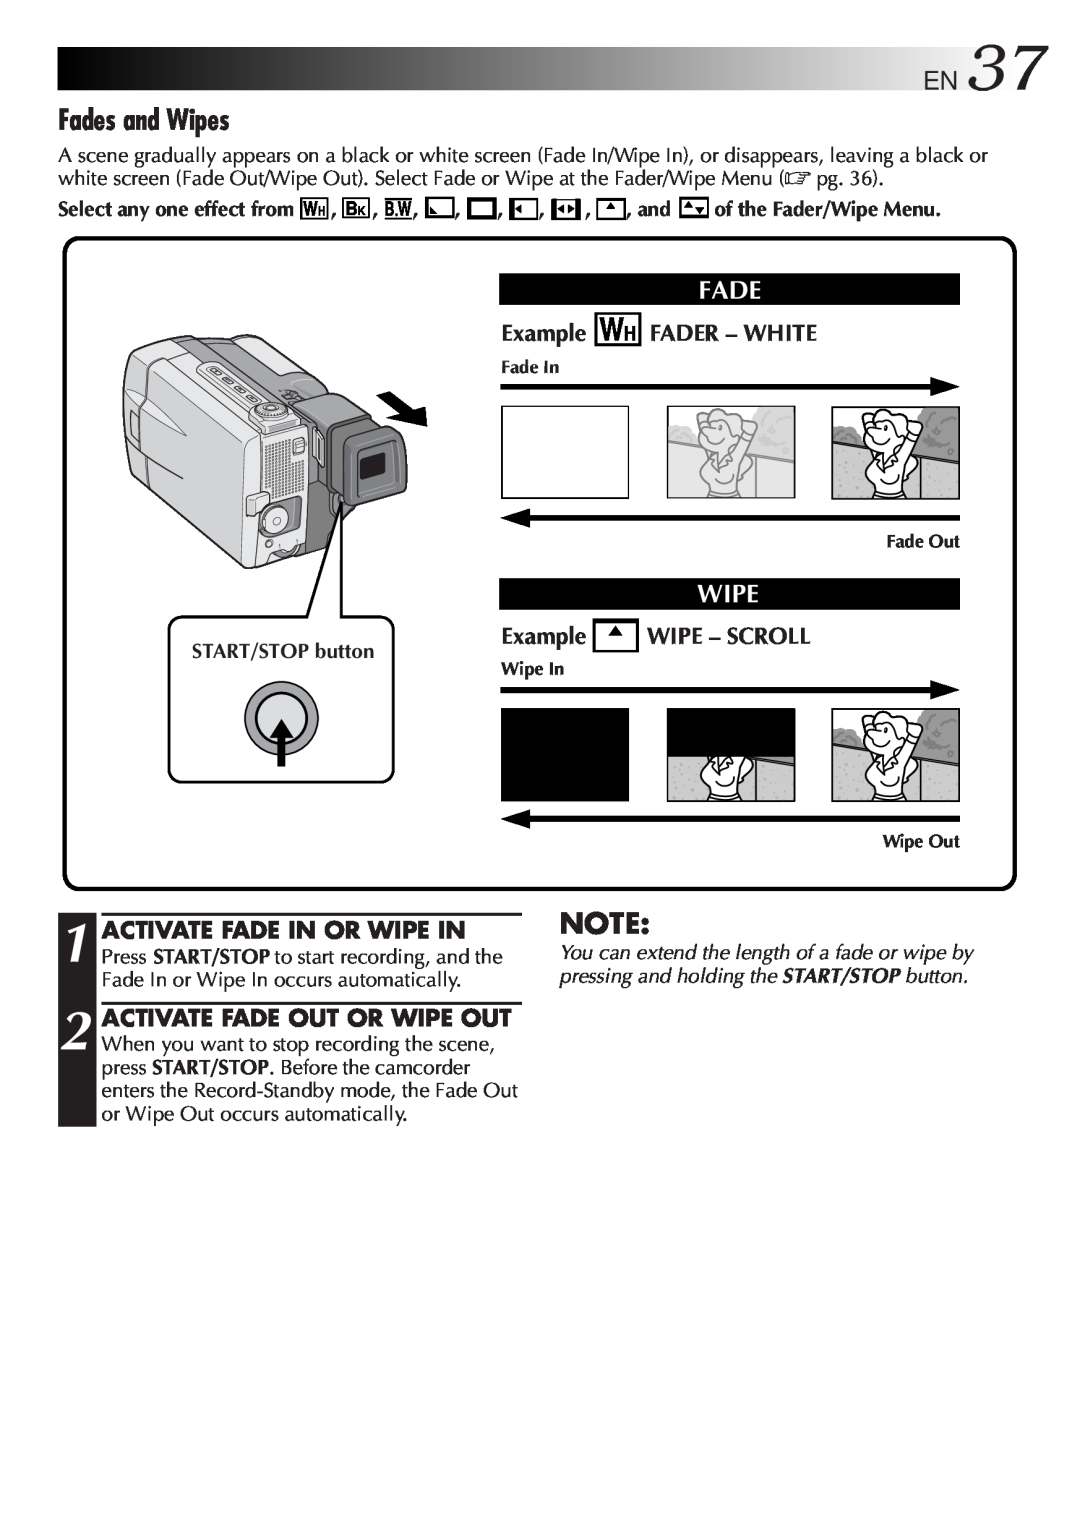 JVC GR-DVL9000 manual Fades and Wipes, EN37, Fader – White, Example WIPE – SCROLL 